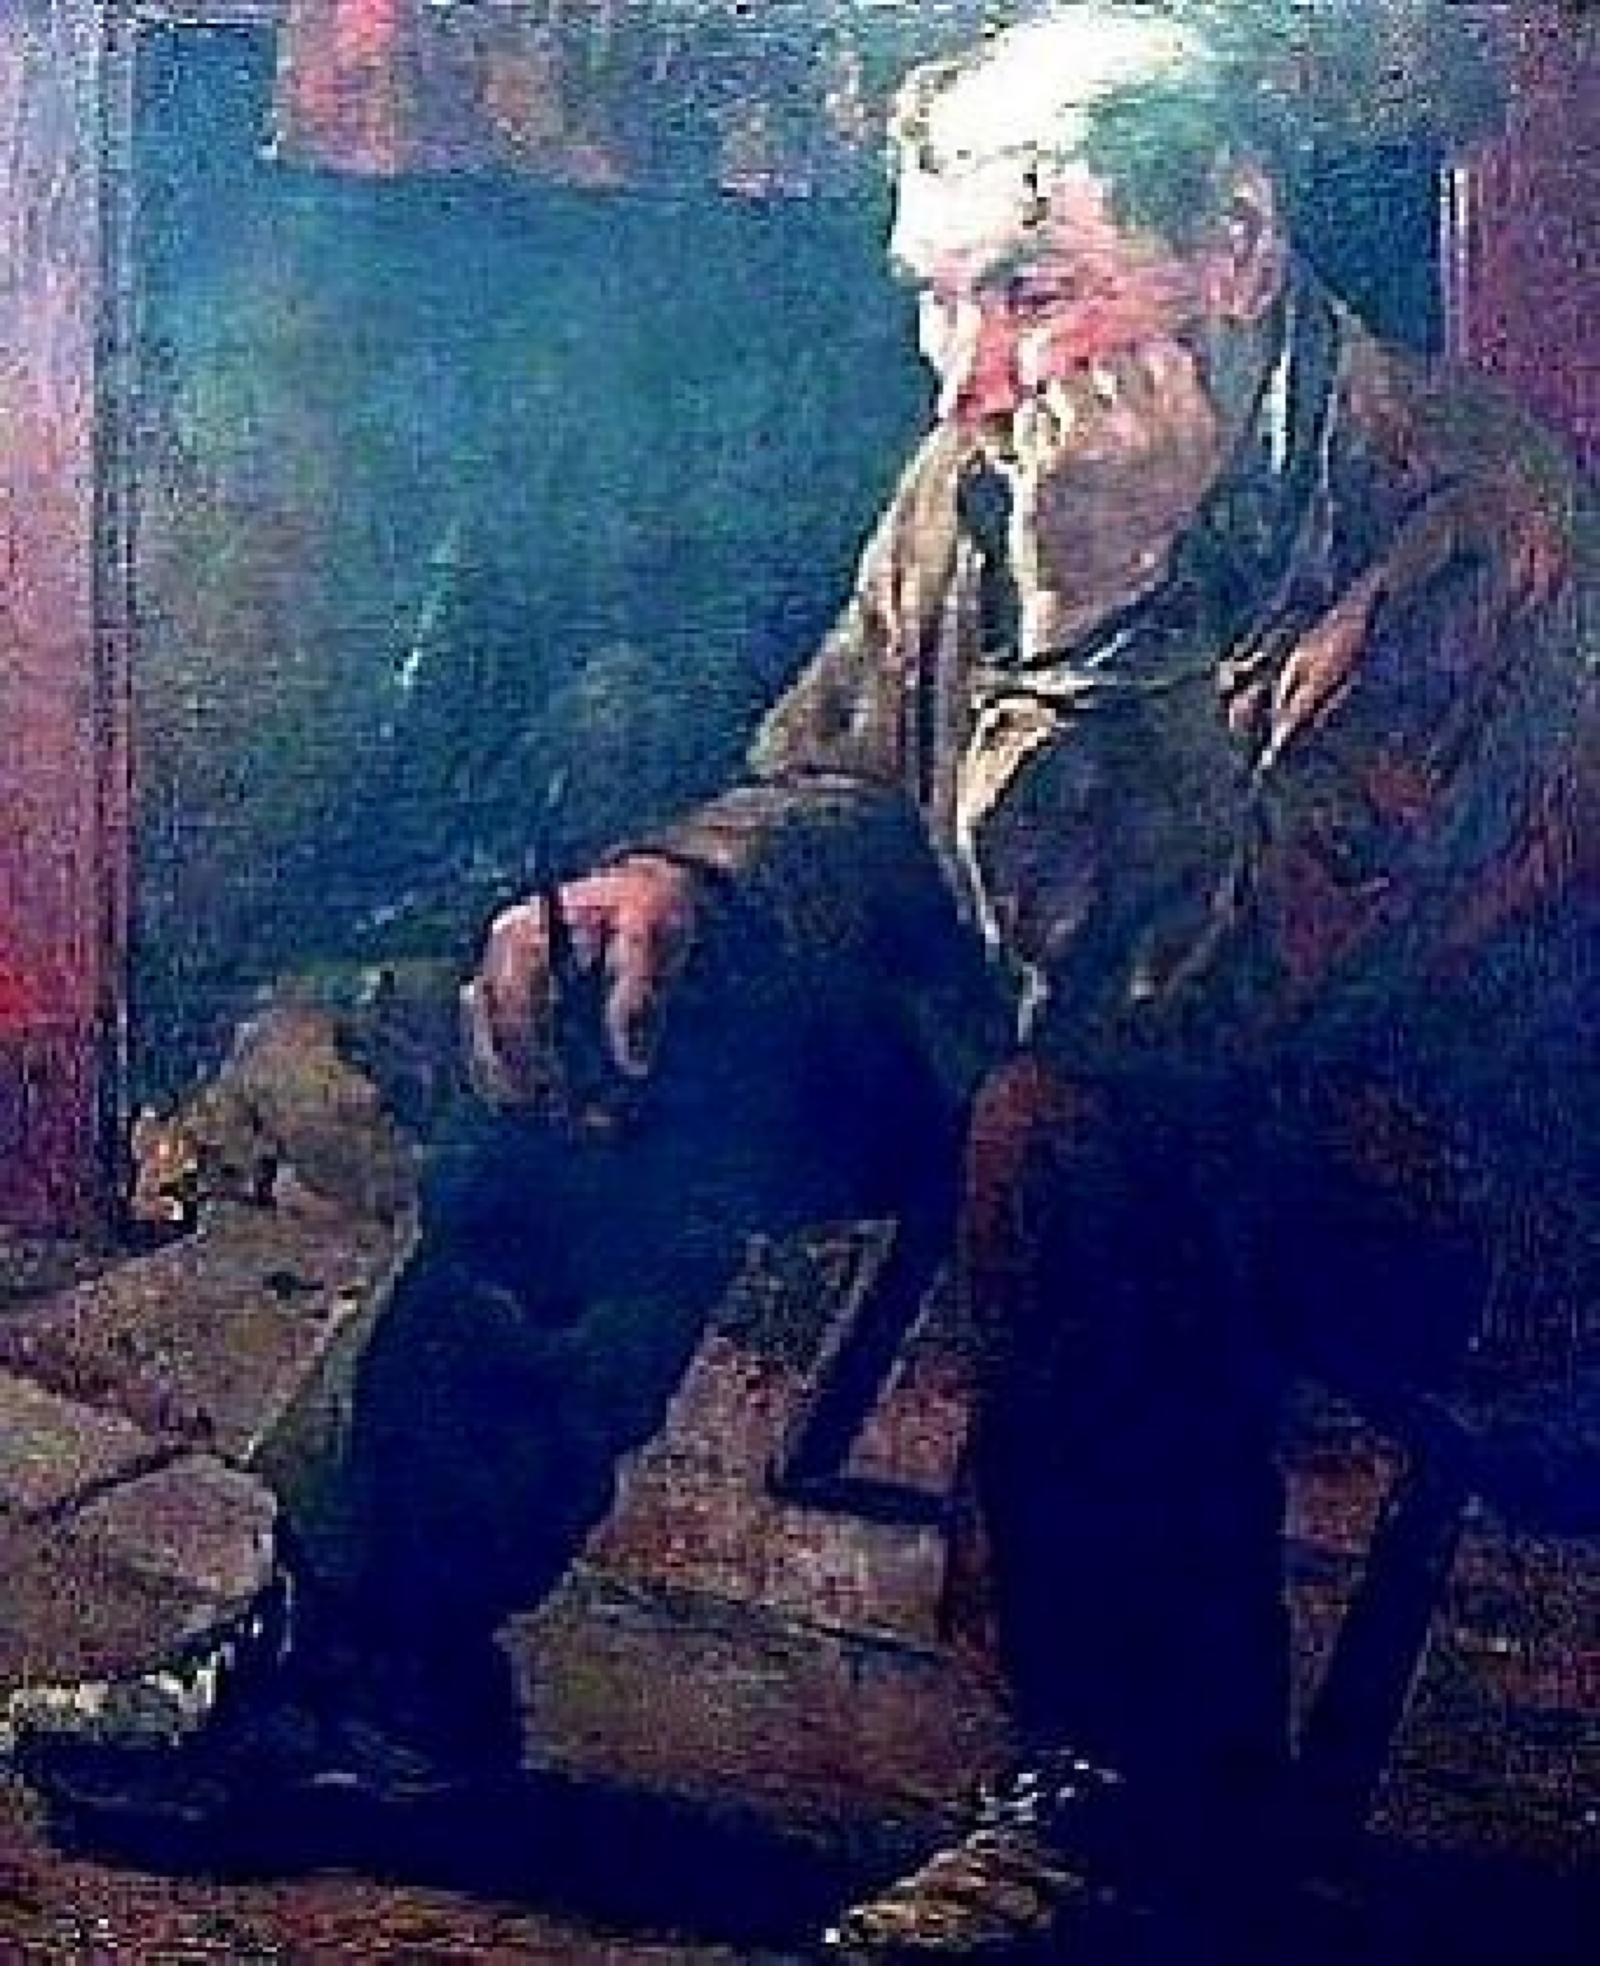 Older man, crouched, sitting on a very low stool.